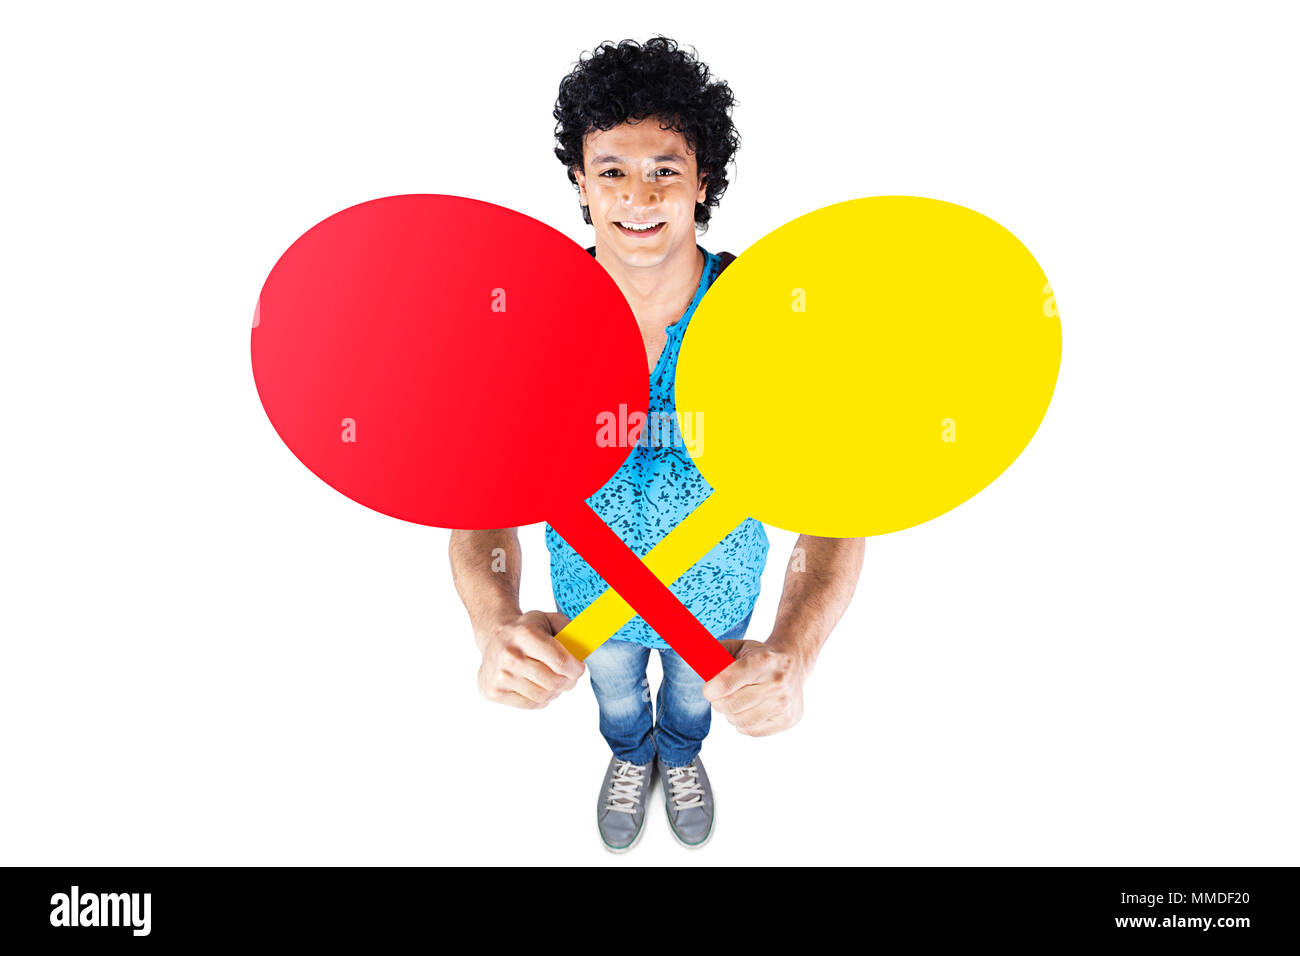 One Teenage Boy College Student Showing Red And Yellow Boad Stock Photo